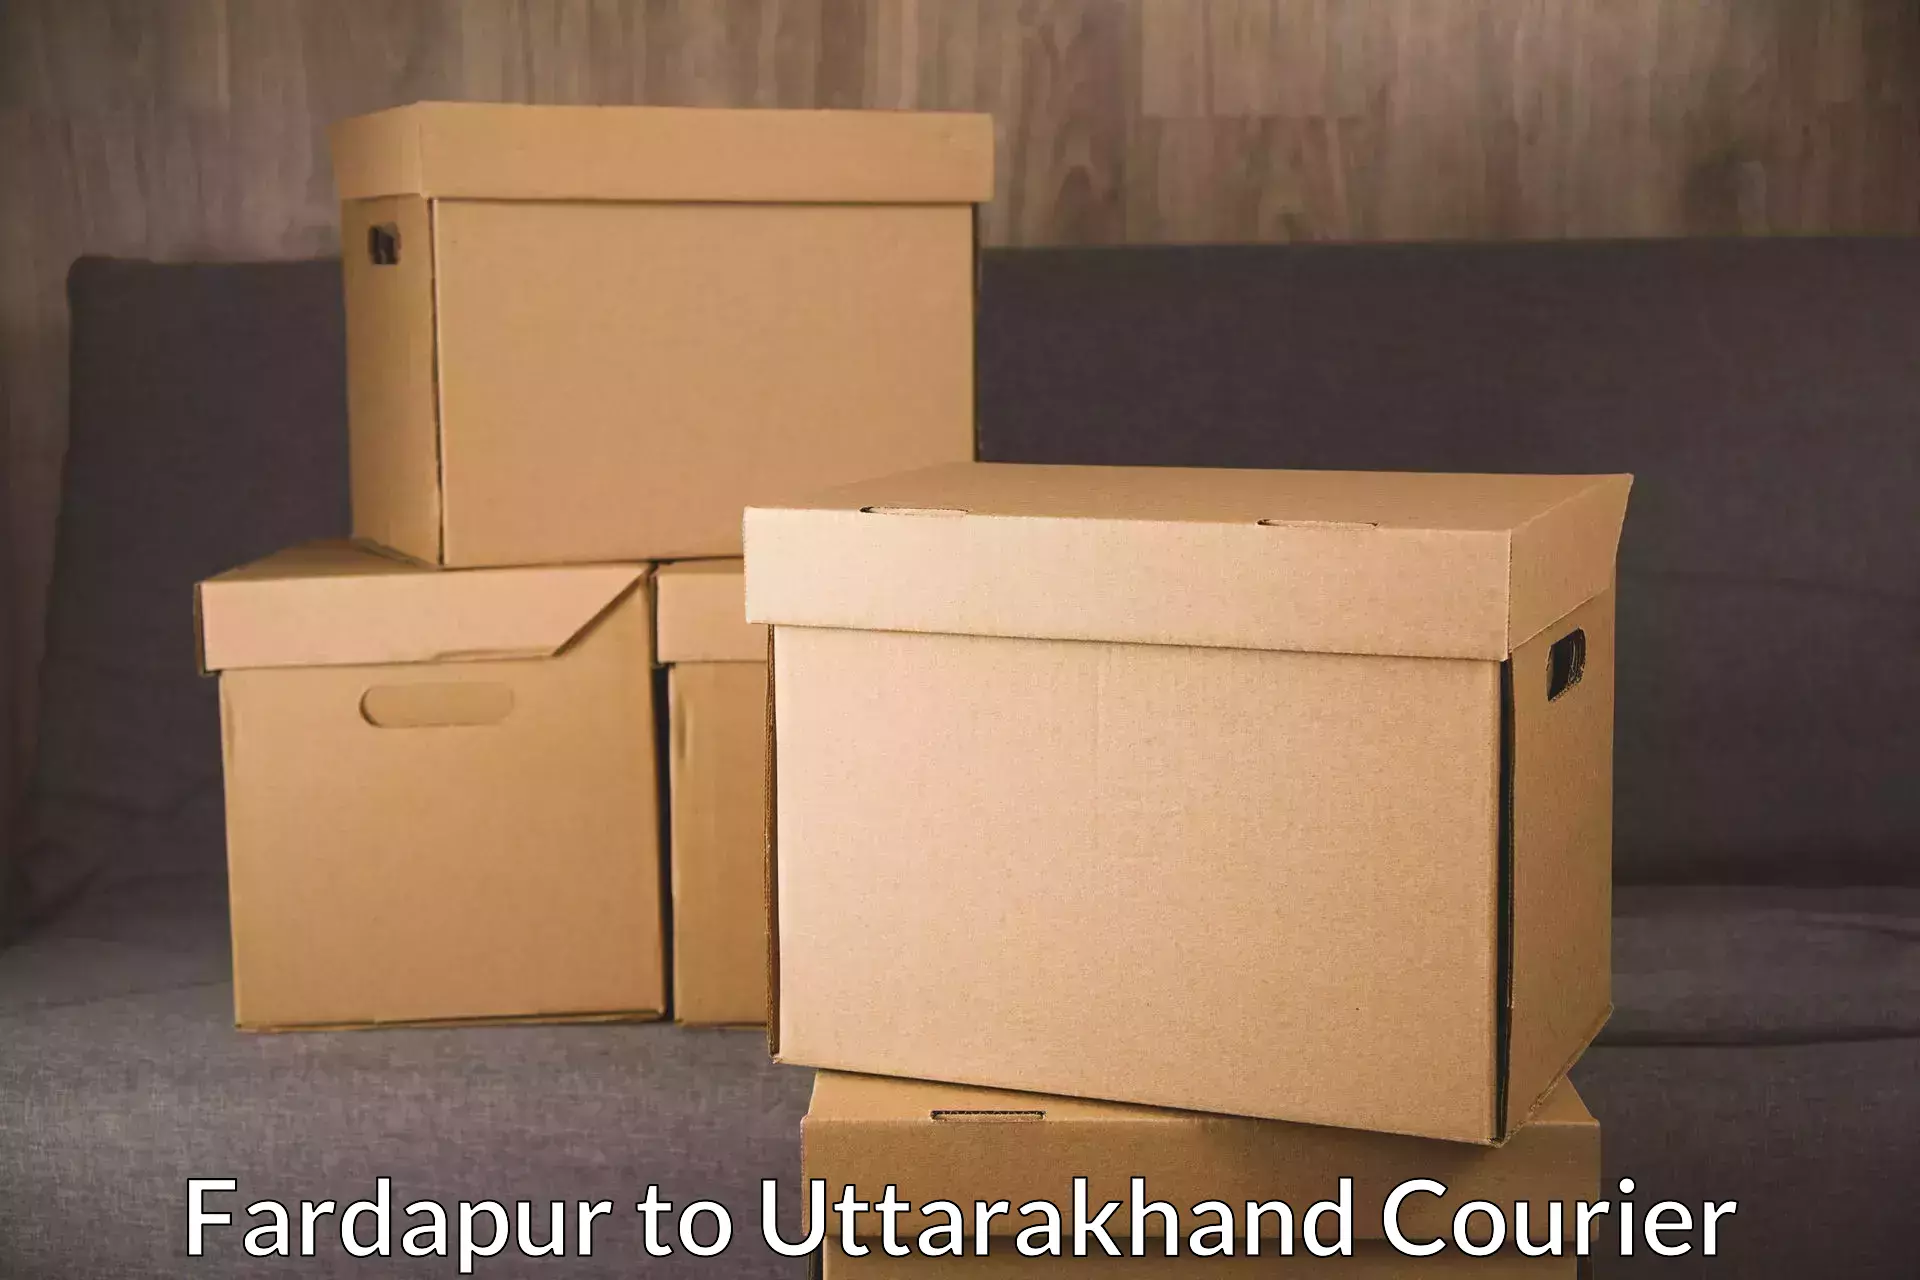 Full-service courier options Fardapur to Bhagwanpur